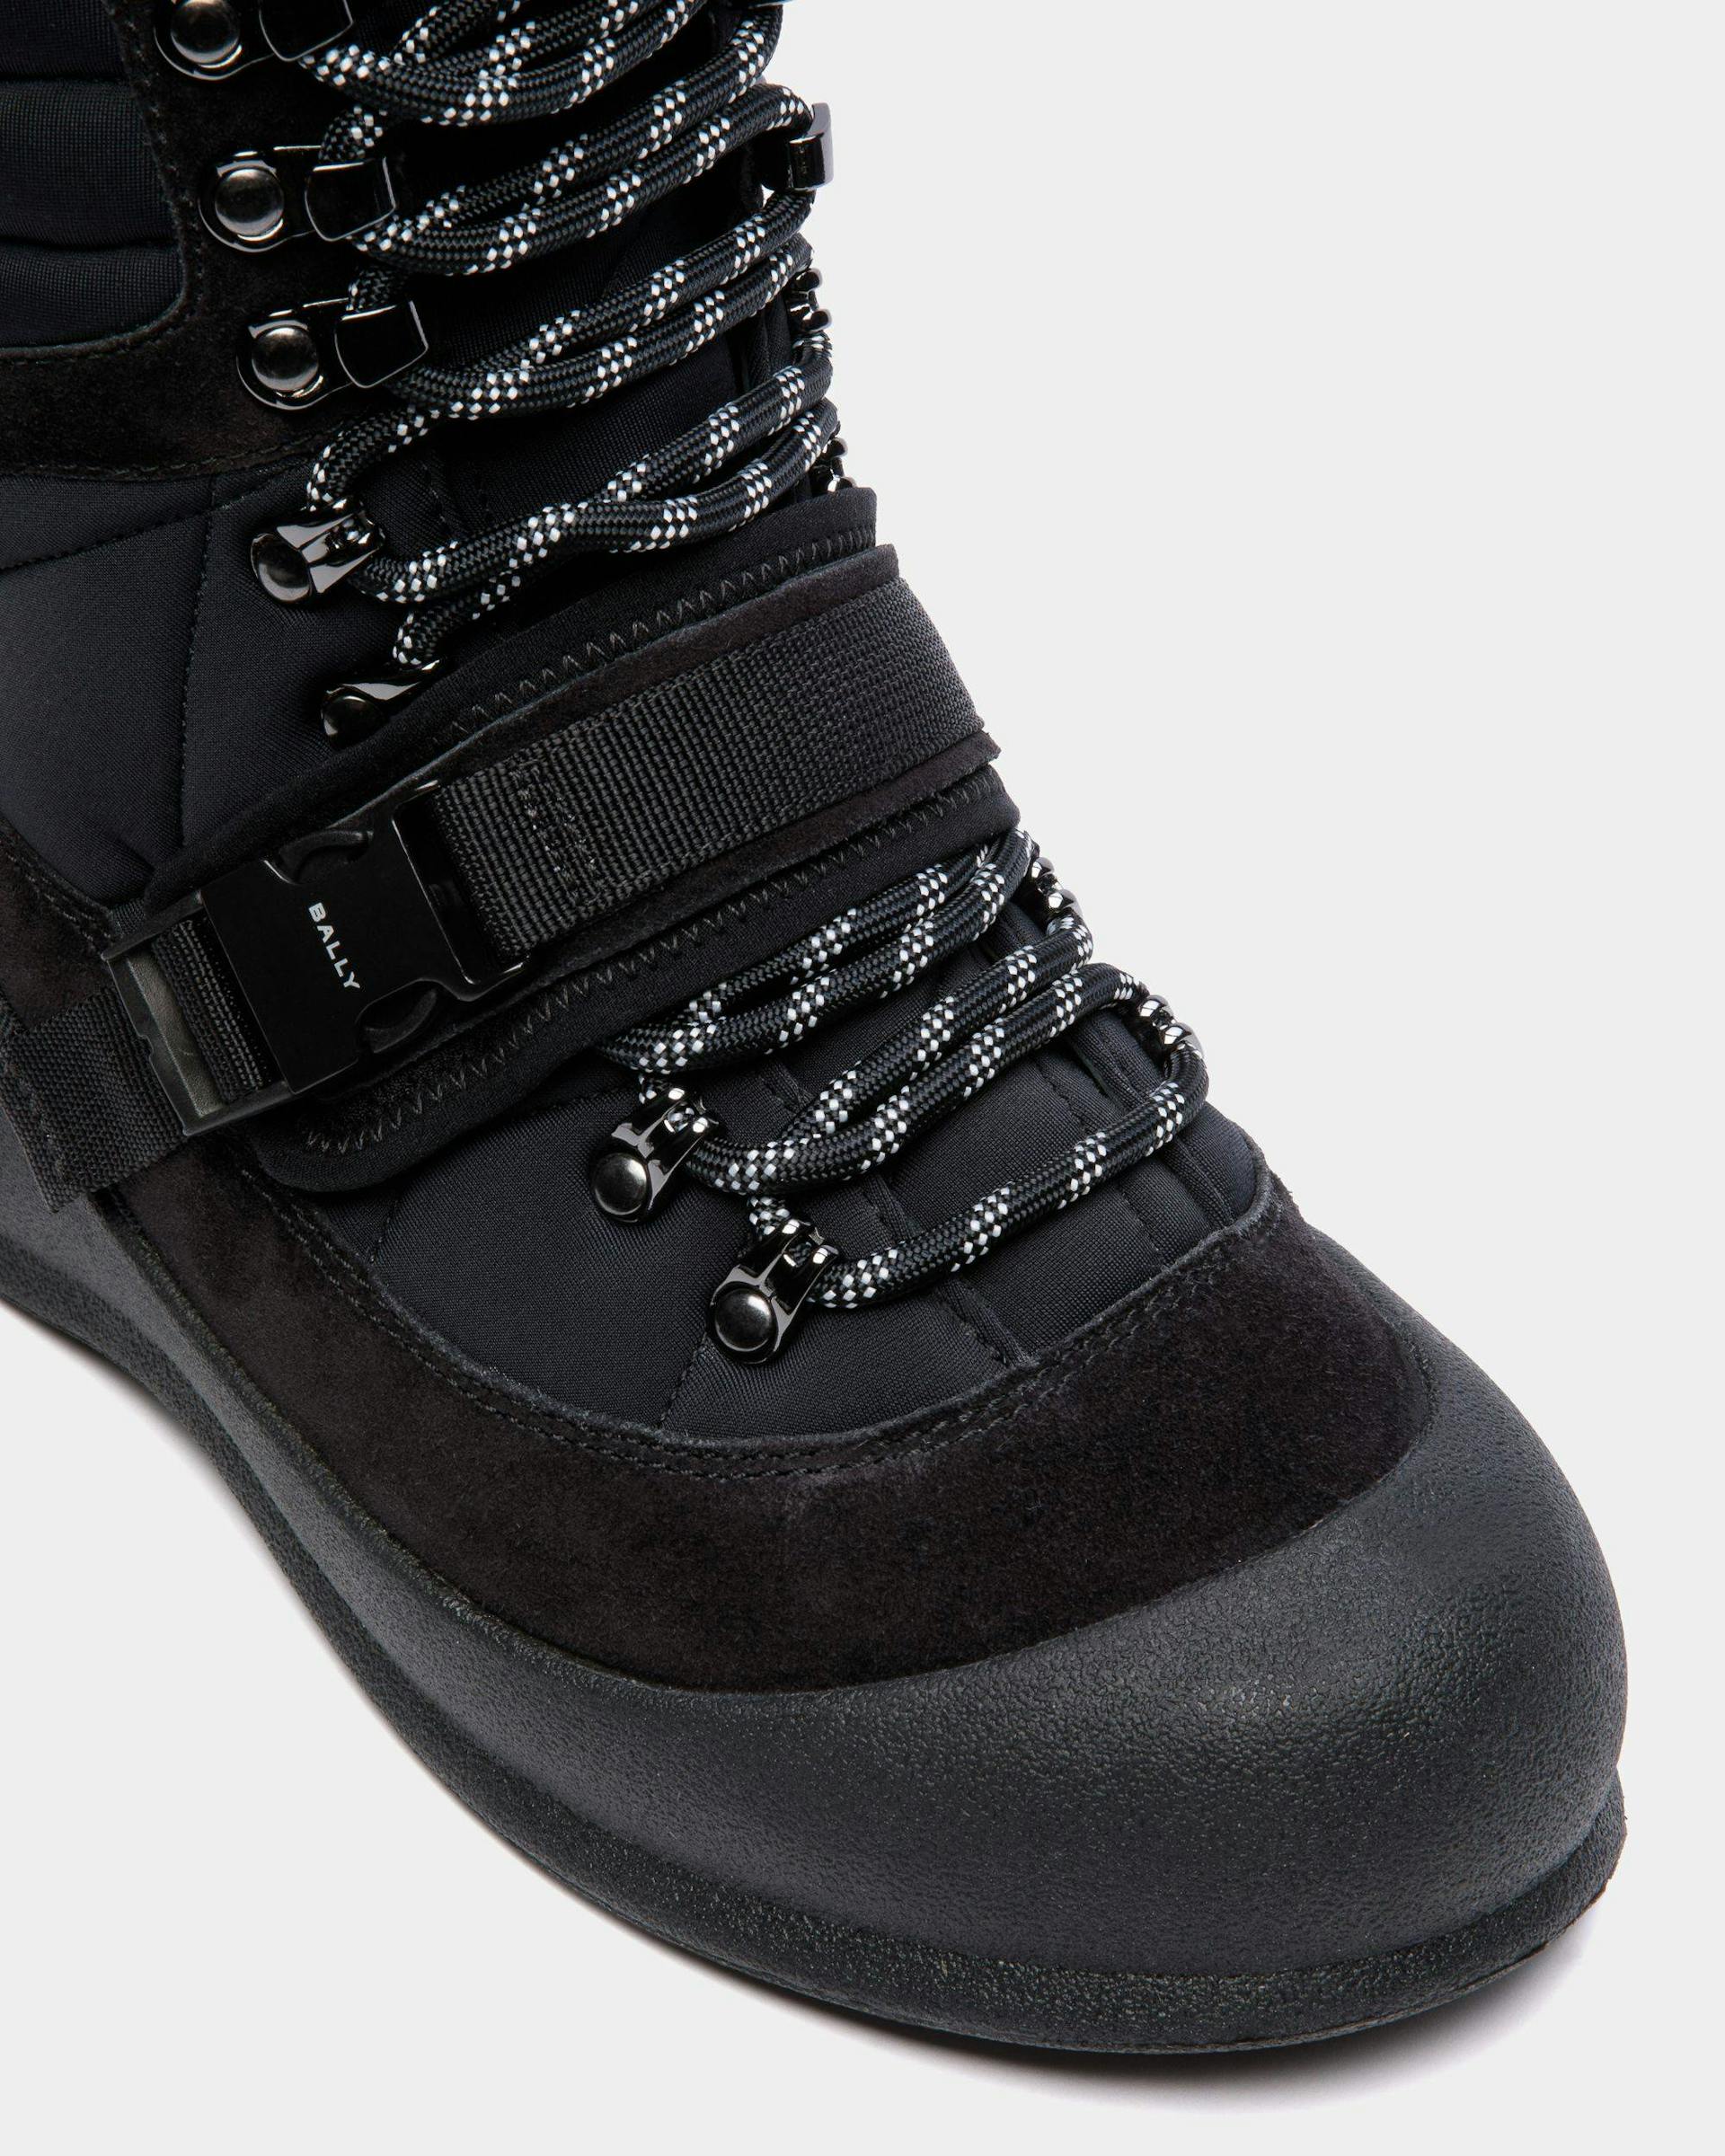 Women's Frei Lace-Up Boot In Black Nylon | Bally | Still Life Detail